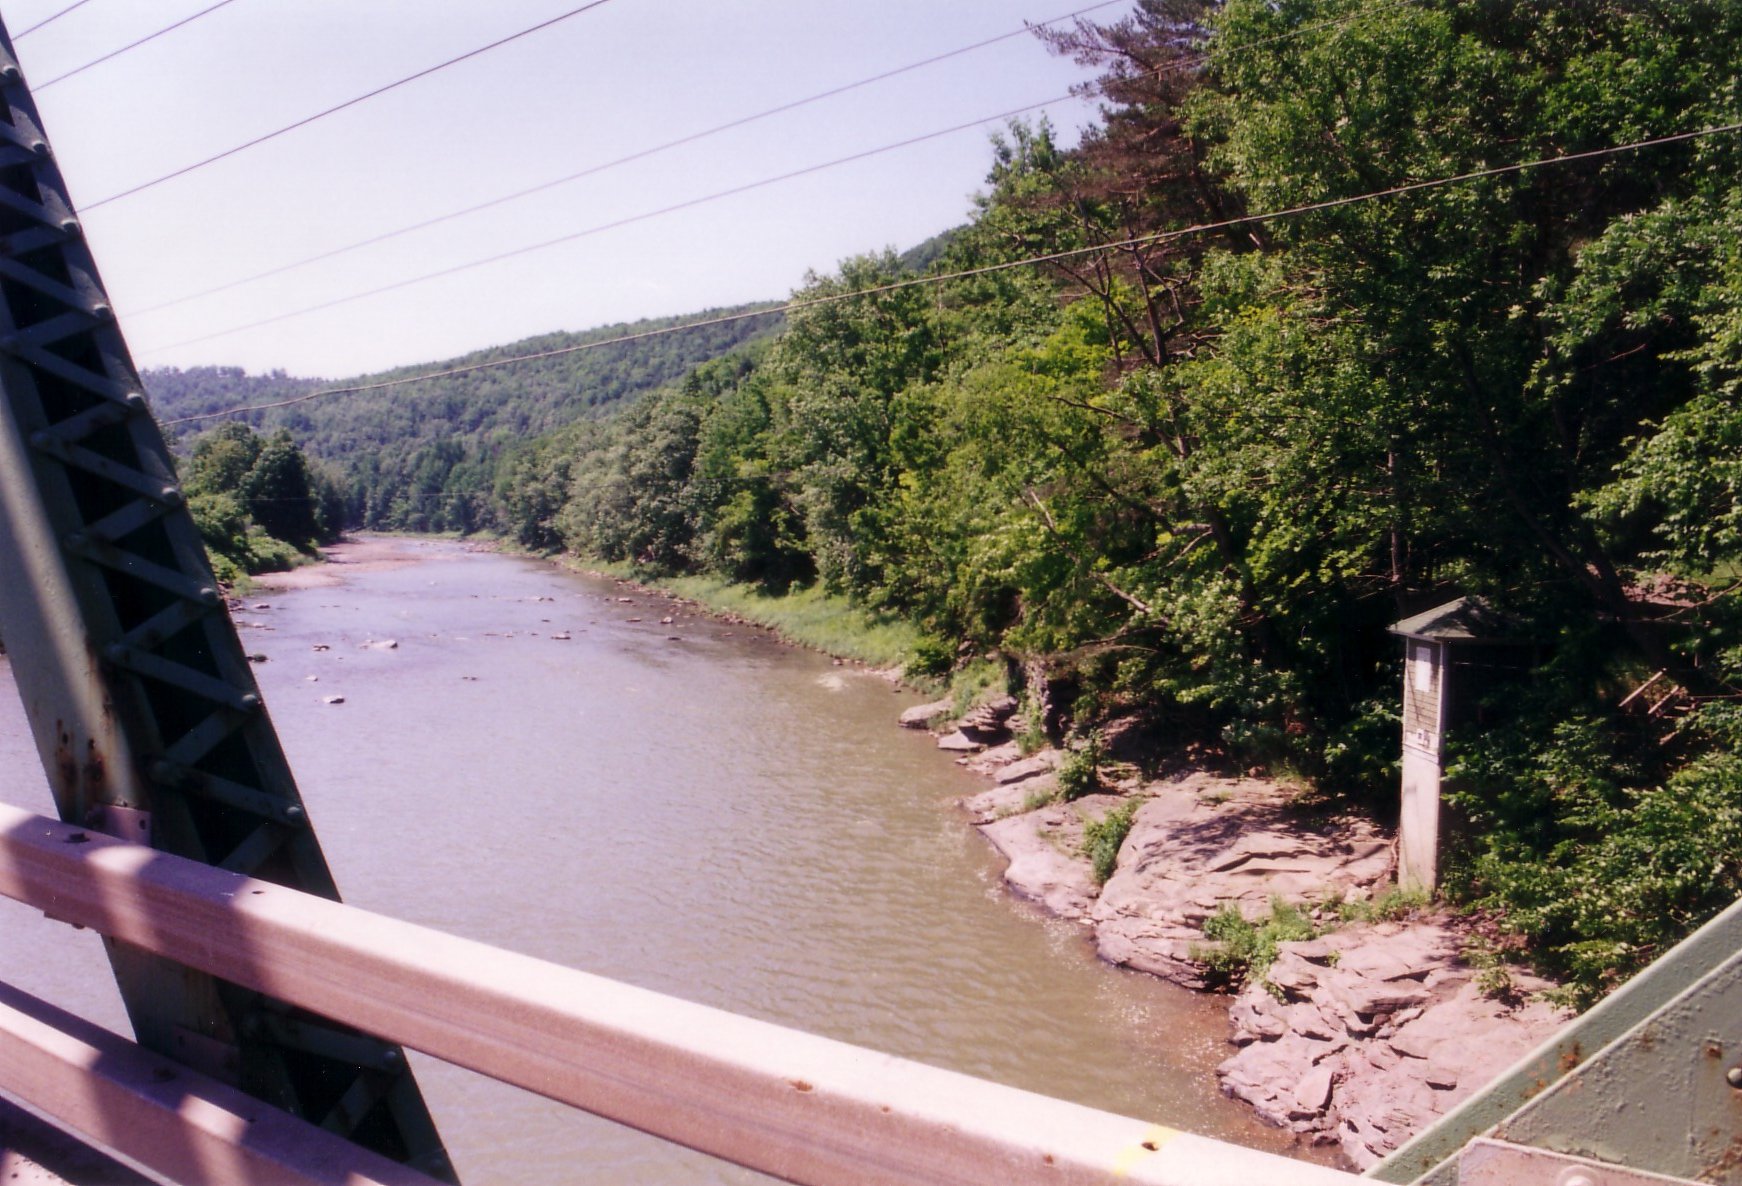 Photograph of the Schoharie Creek at Prattsville, NY (PTVN6)